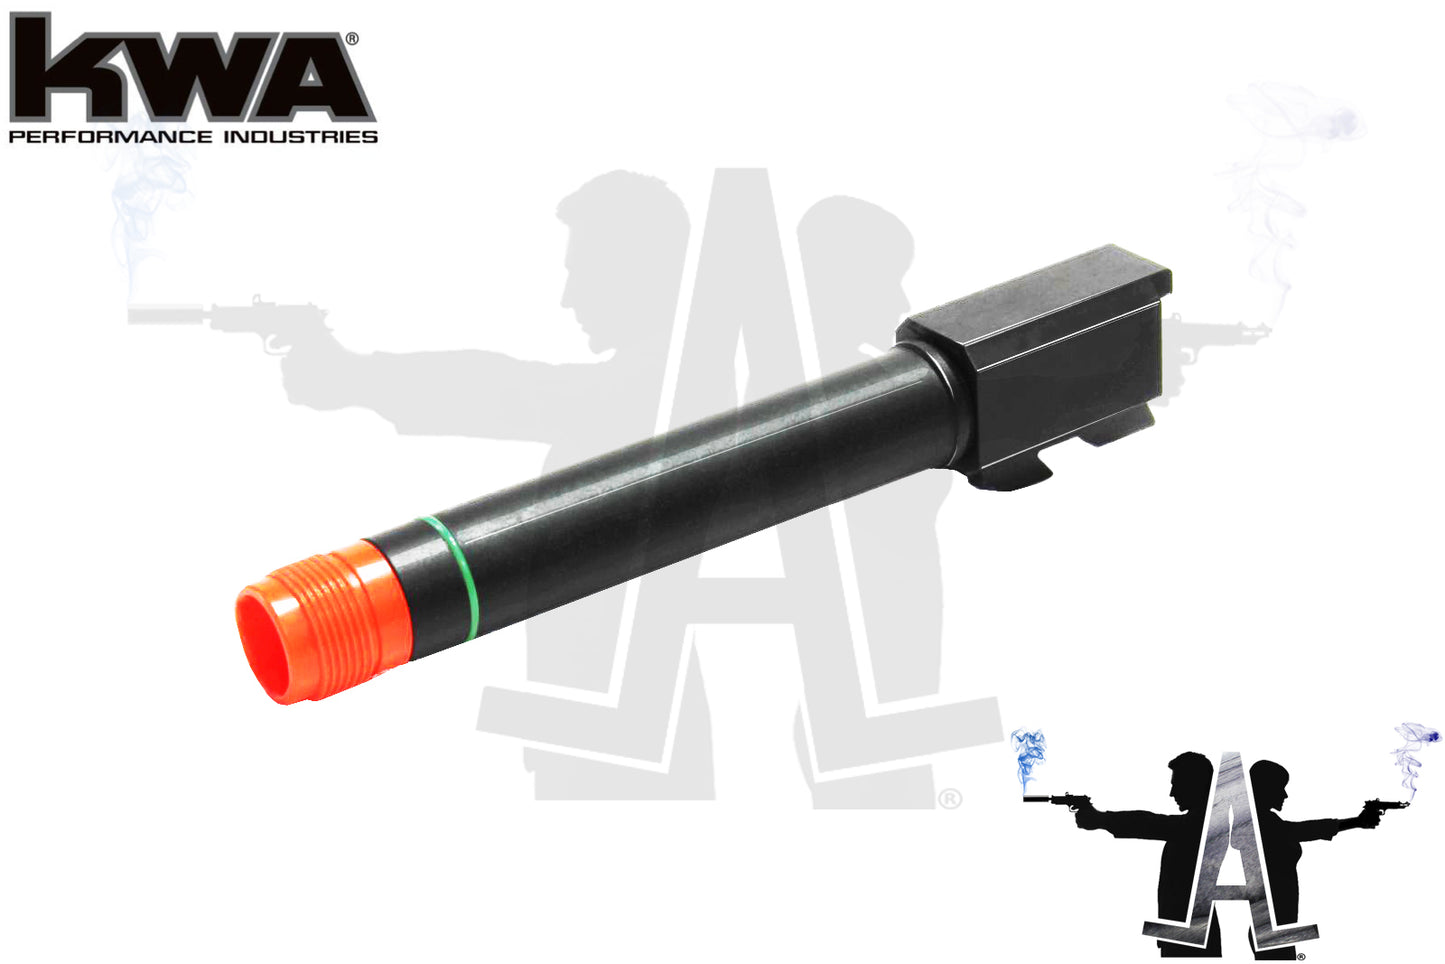 BUY2GET1FREE: KWA HK 45 Licensed Serialized Outer Barrel w/ Threaded Tip